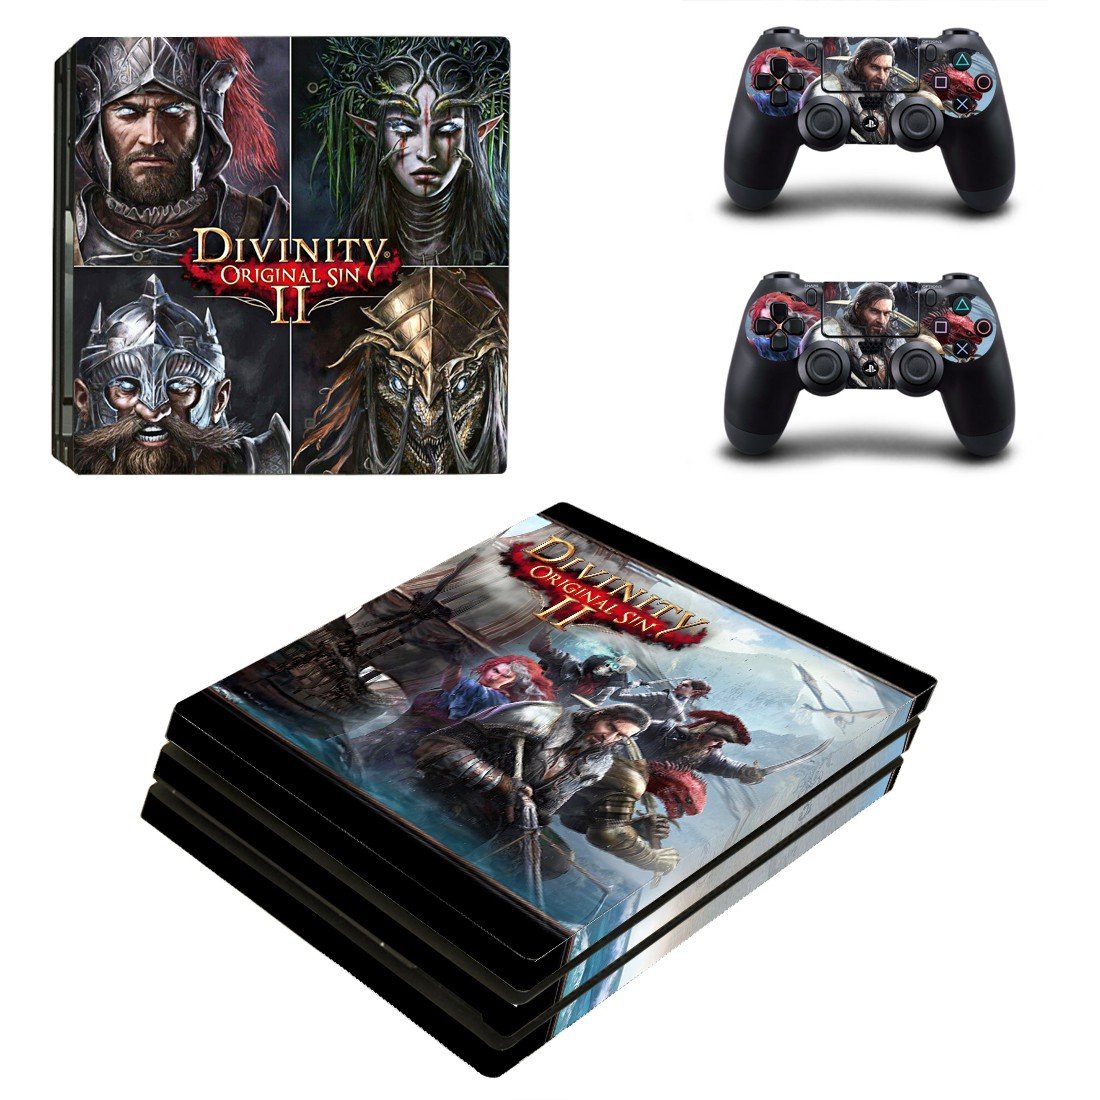 download divinity original sin 2 ps4 for free